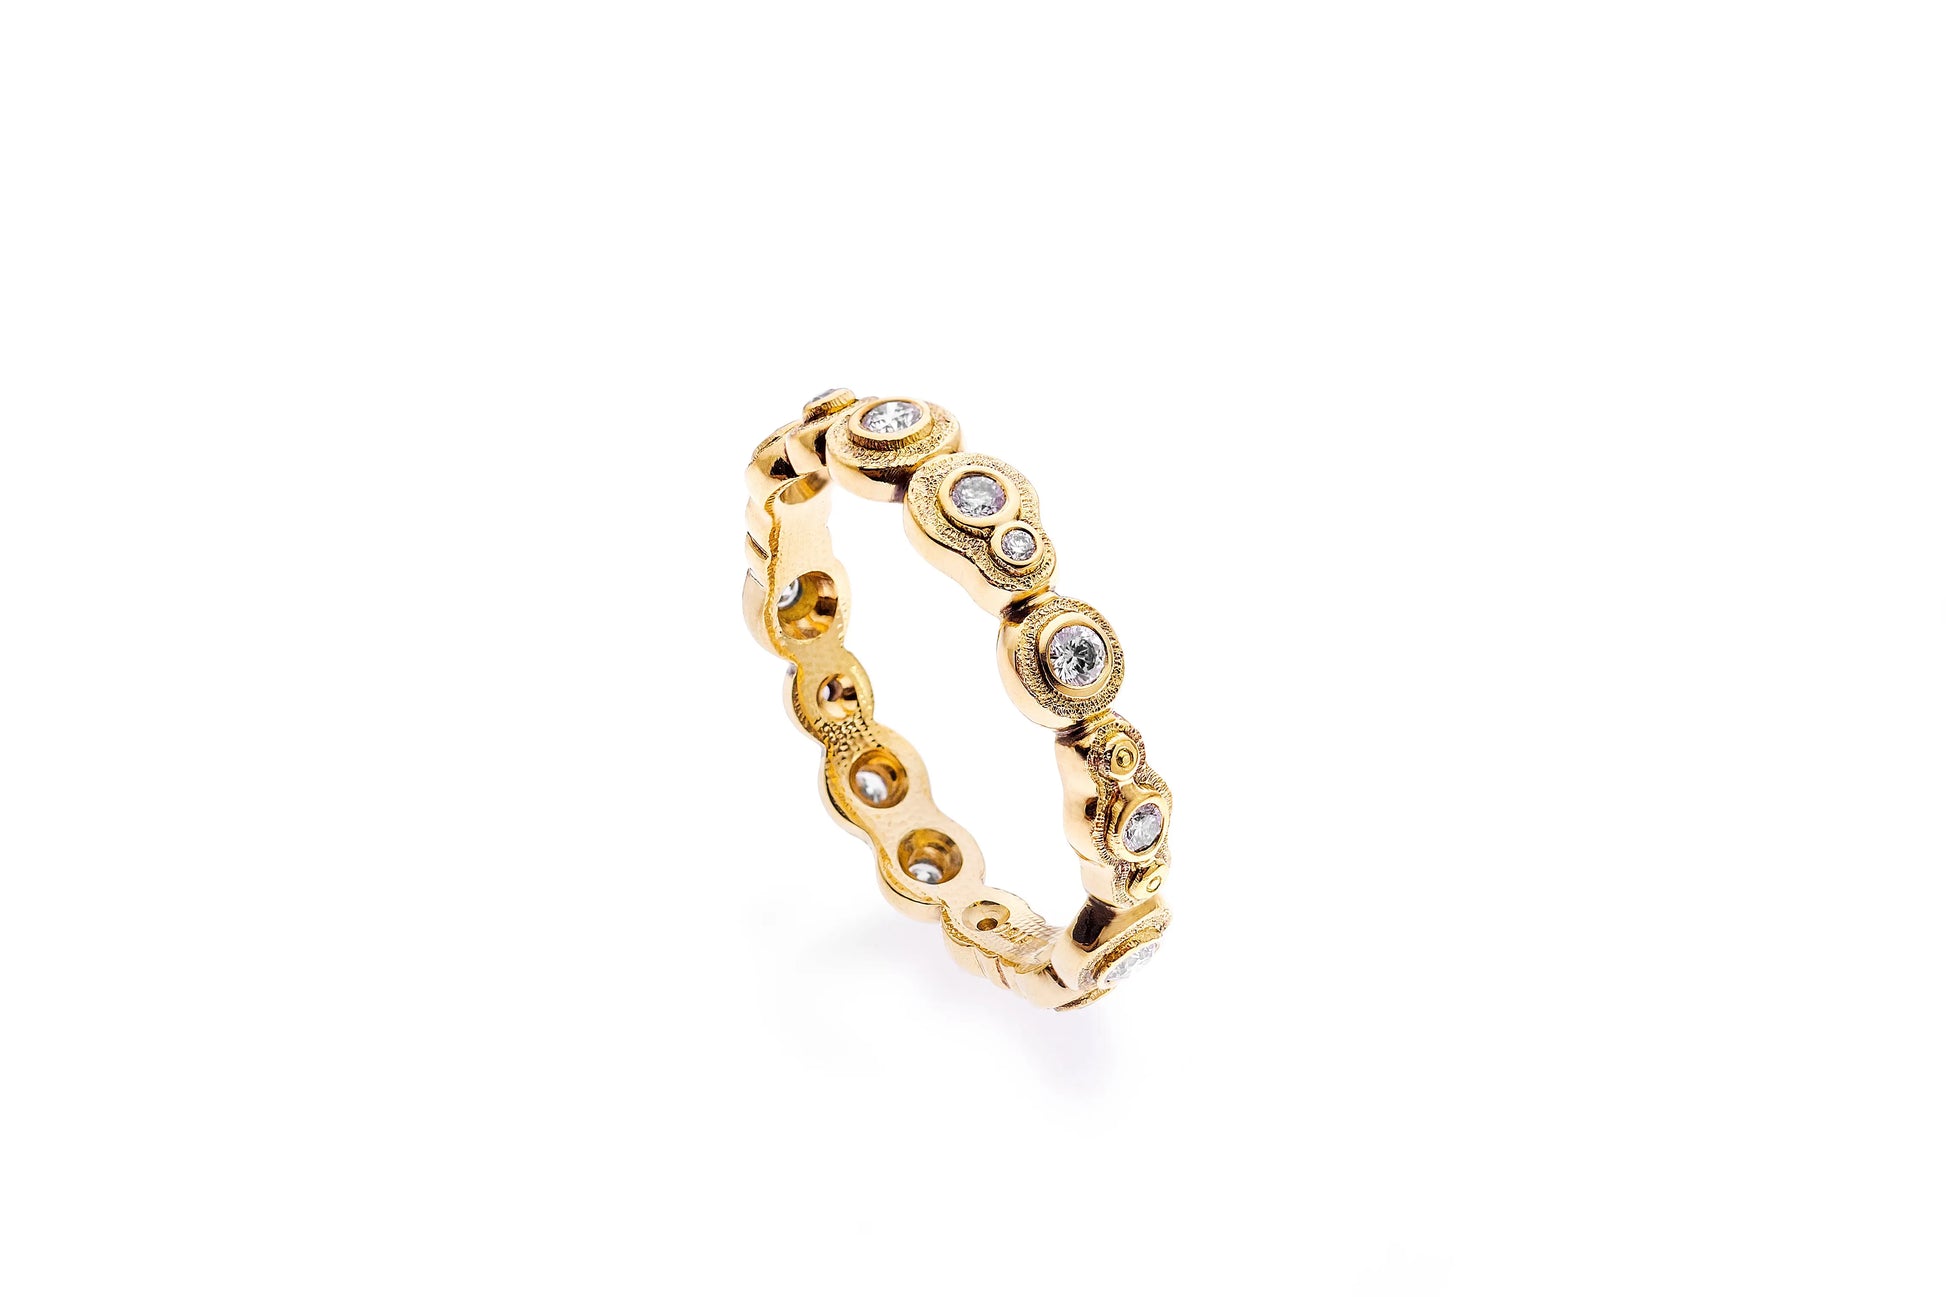 Alex Sepkus begins with a wax model, which is eventually cast in 18kt gold, or platinum, and then hand-finished. The band is great on its own or stacked. It is set in 18K Yellow Gold with Diamonds .34 cttw. The band width is 4mm. The ring size is 6.5. If you need a different size, please email shop@sbvail.com.